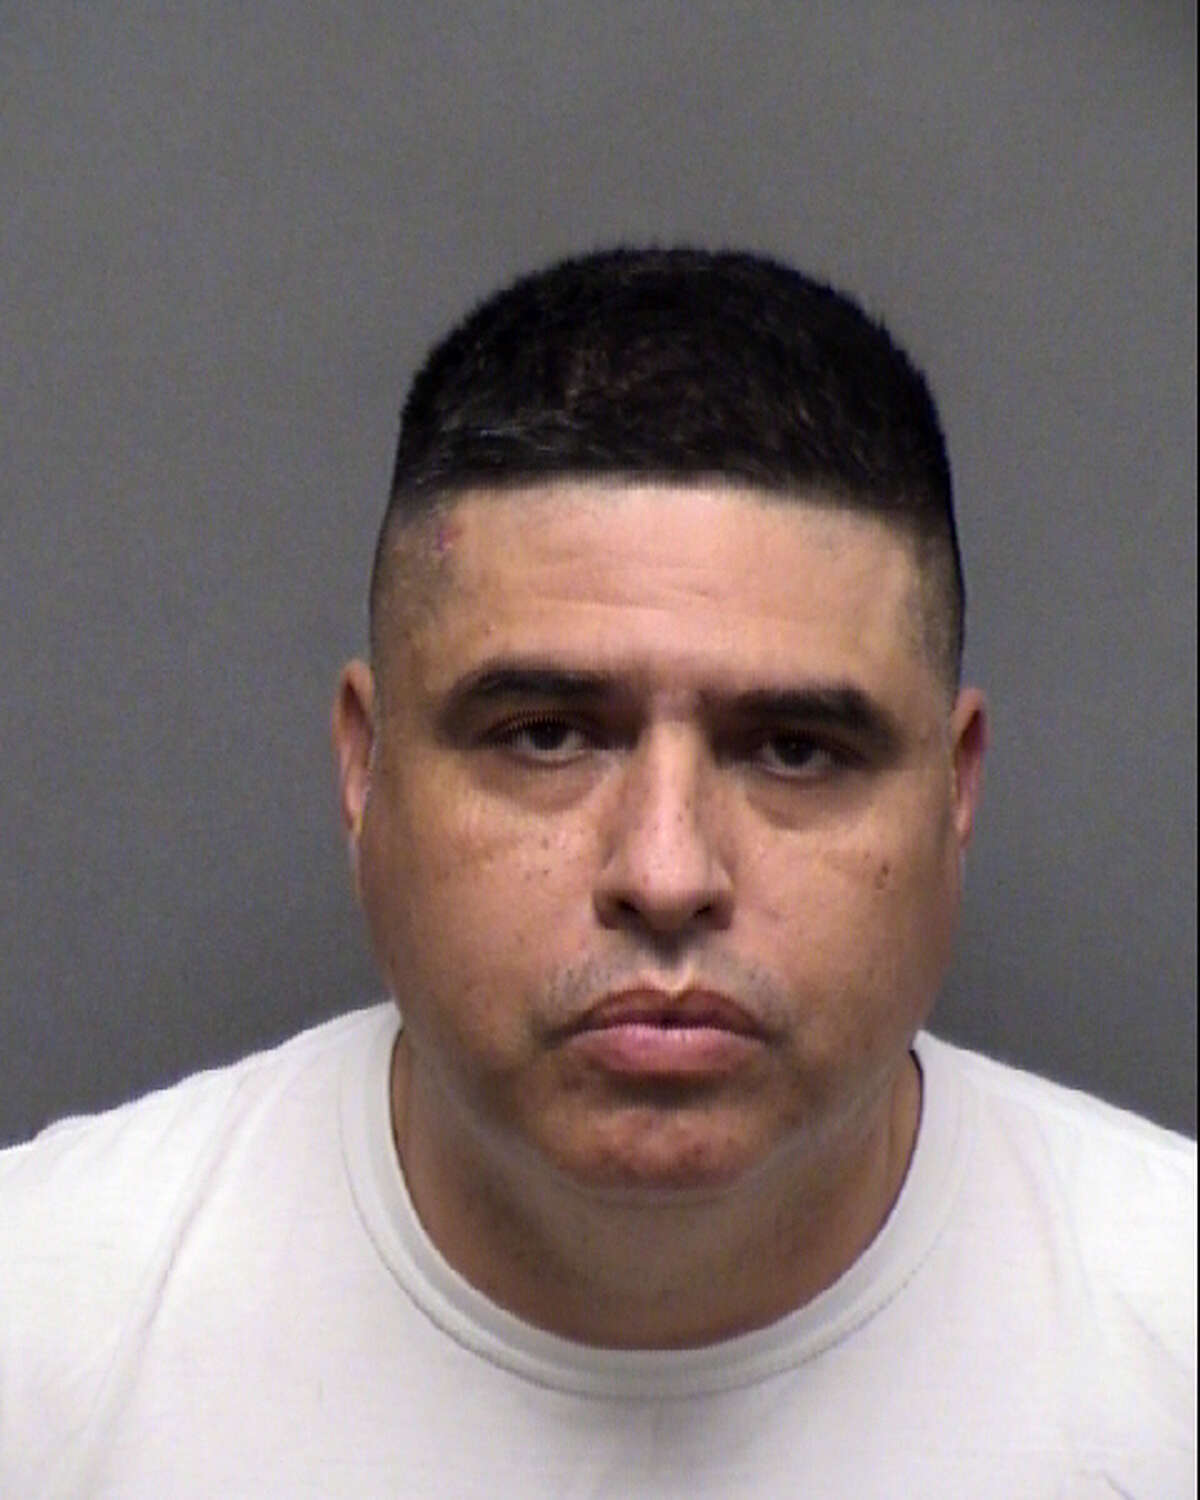 Julius Cuellar, 48, is charged with aggravated robbery.